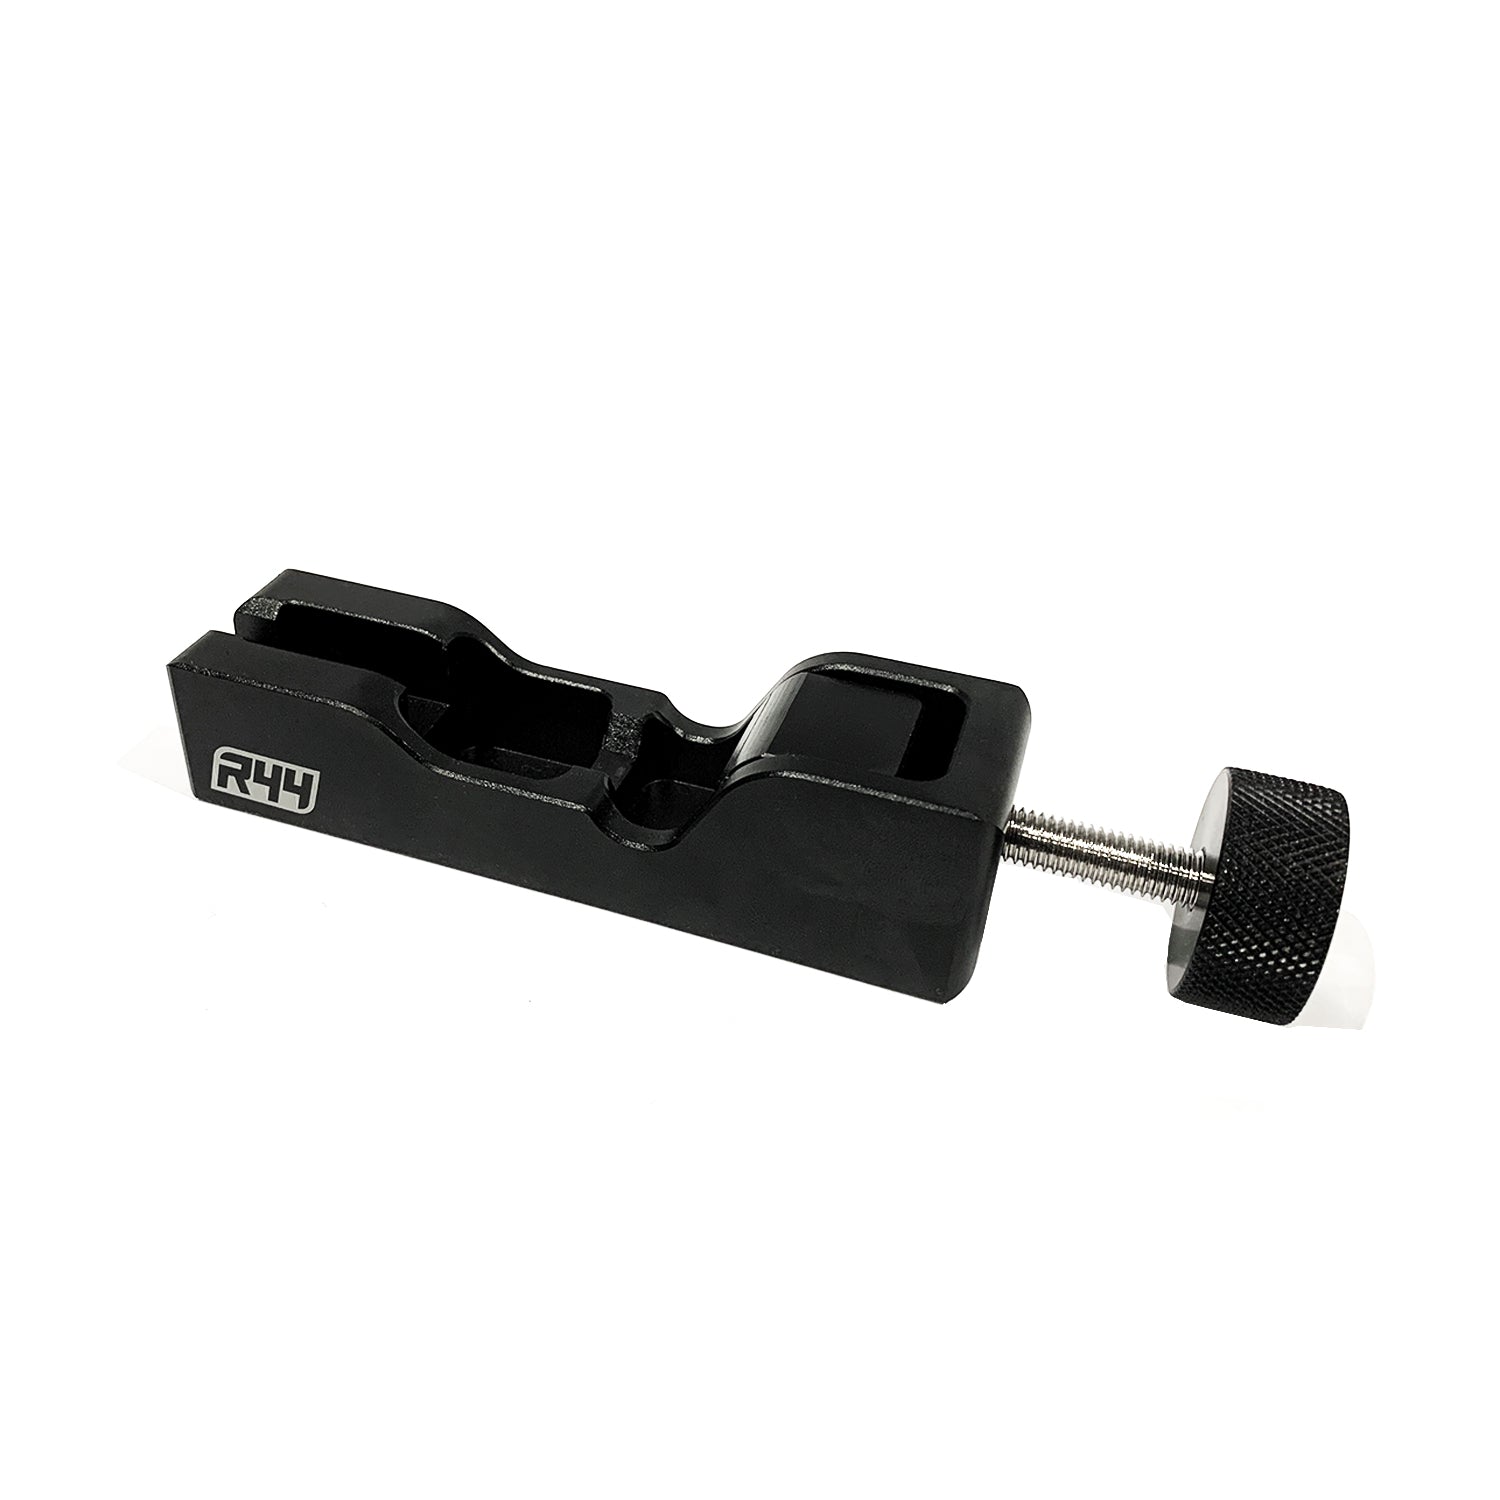 R44 BMW Spark Plug Gap Adjustment Tool For N55, S55, N63 And S63 Engines-R44 Performance